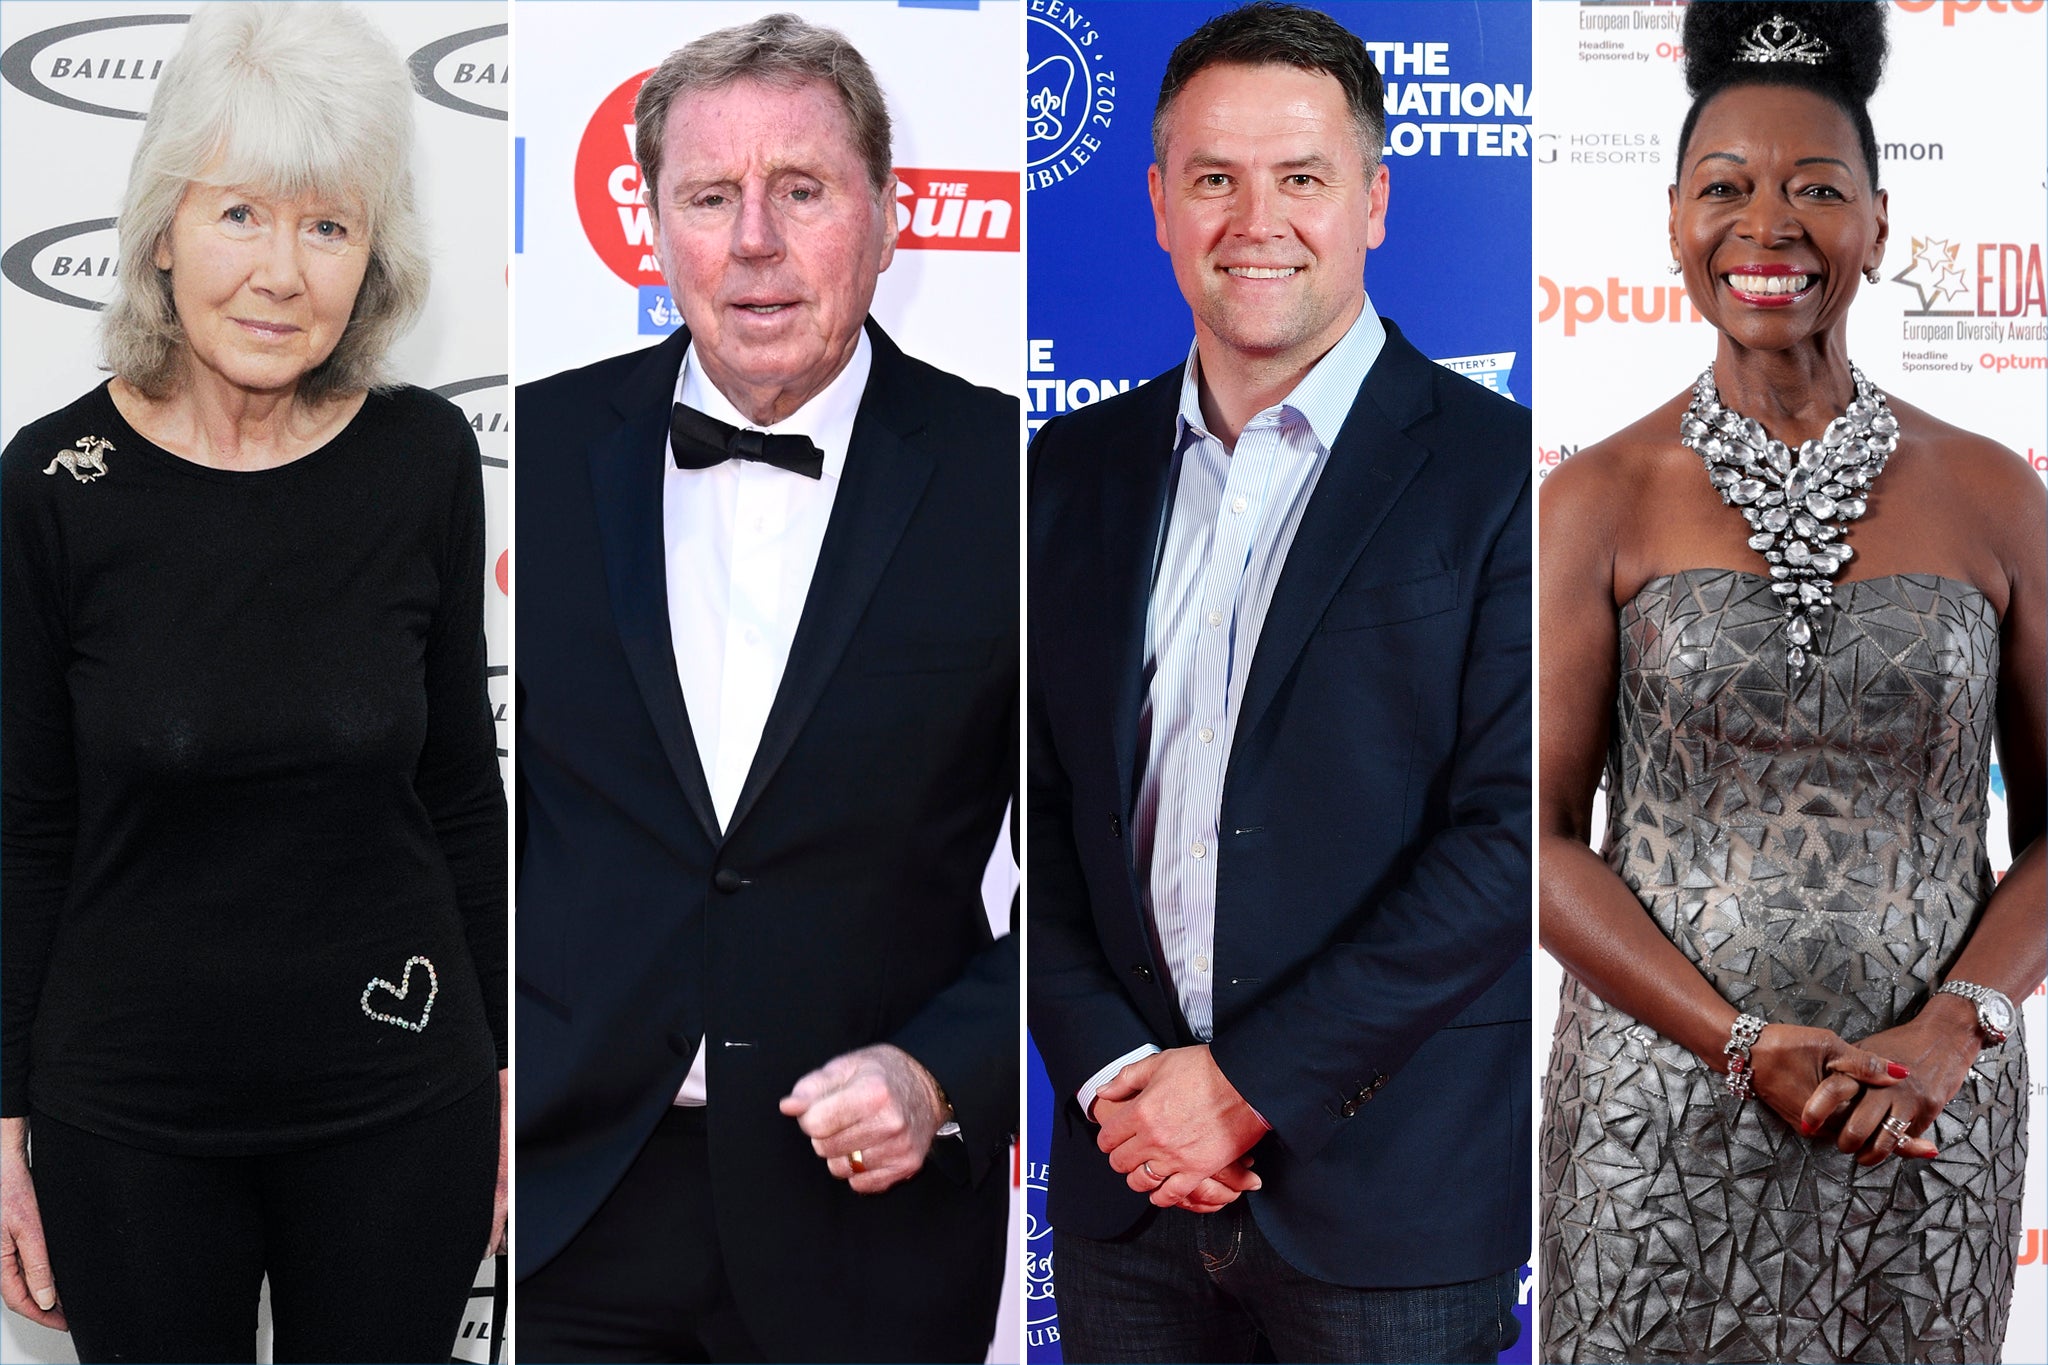 All a-flutter: (from left) Jilly Cooper, Harry Redknapp, Michael Owen and Floella Benjamin are among the signatories of the letter